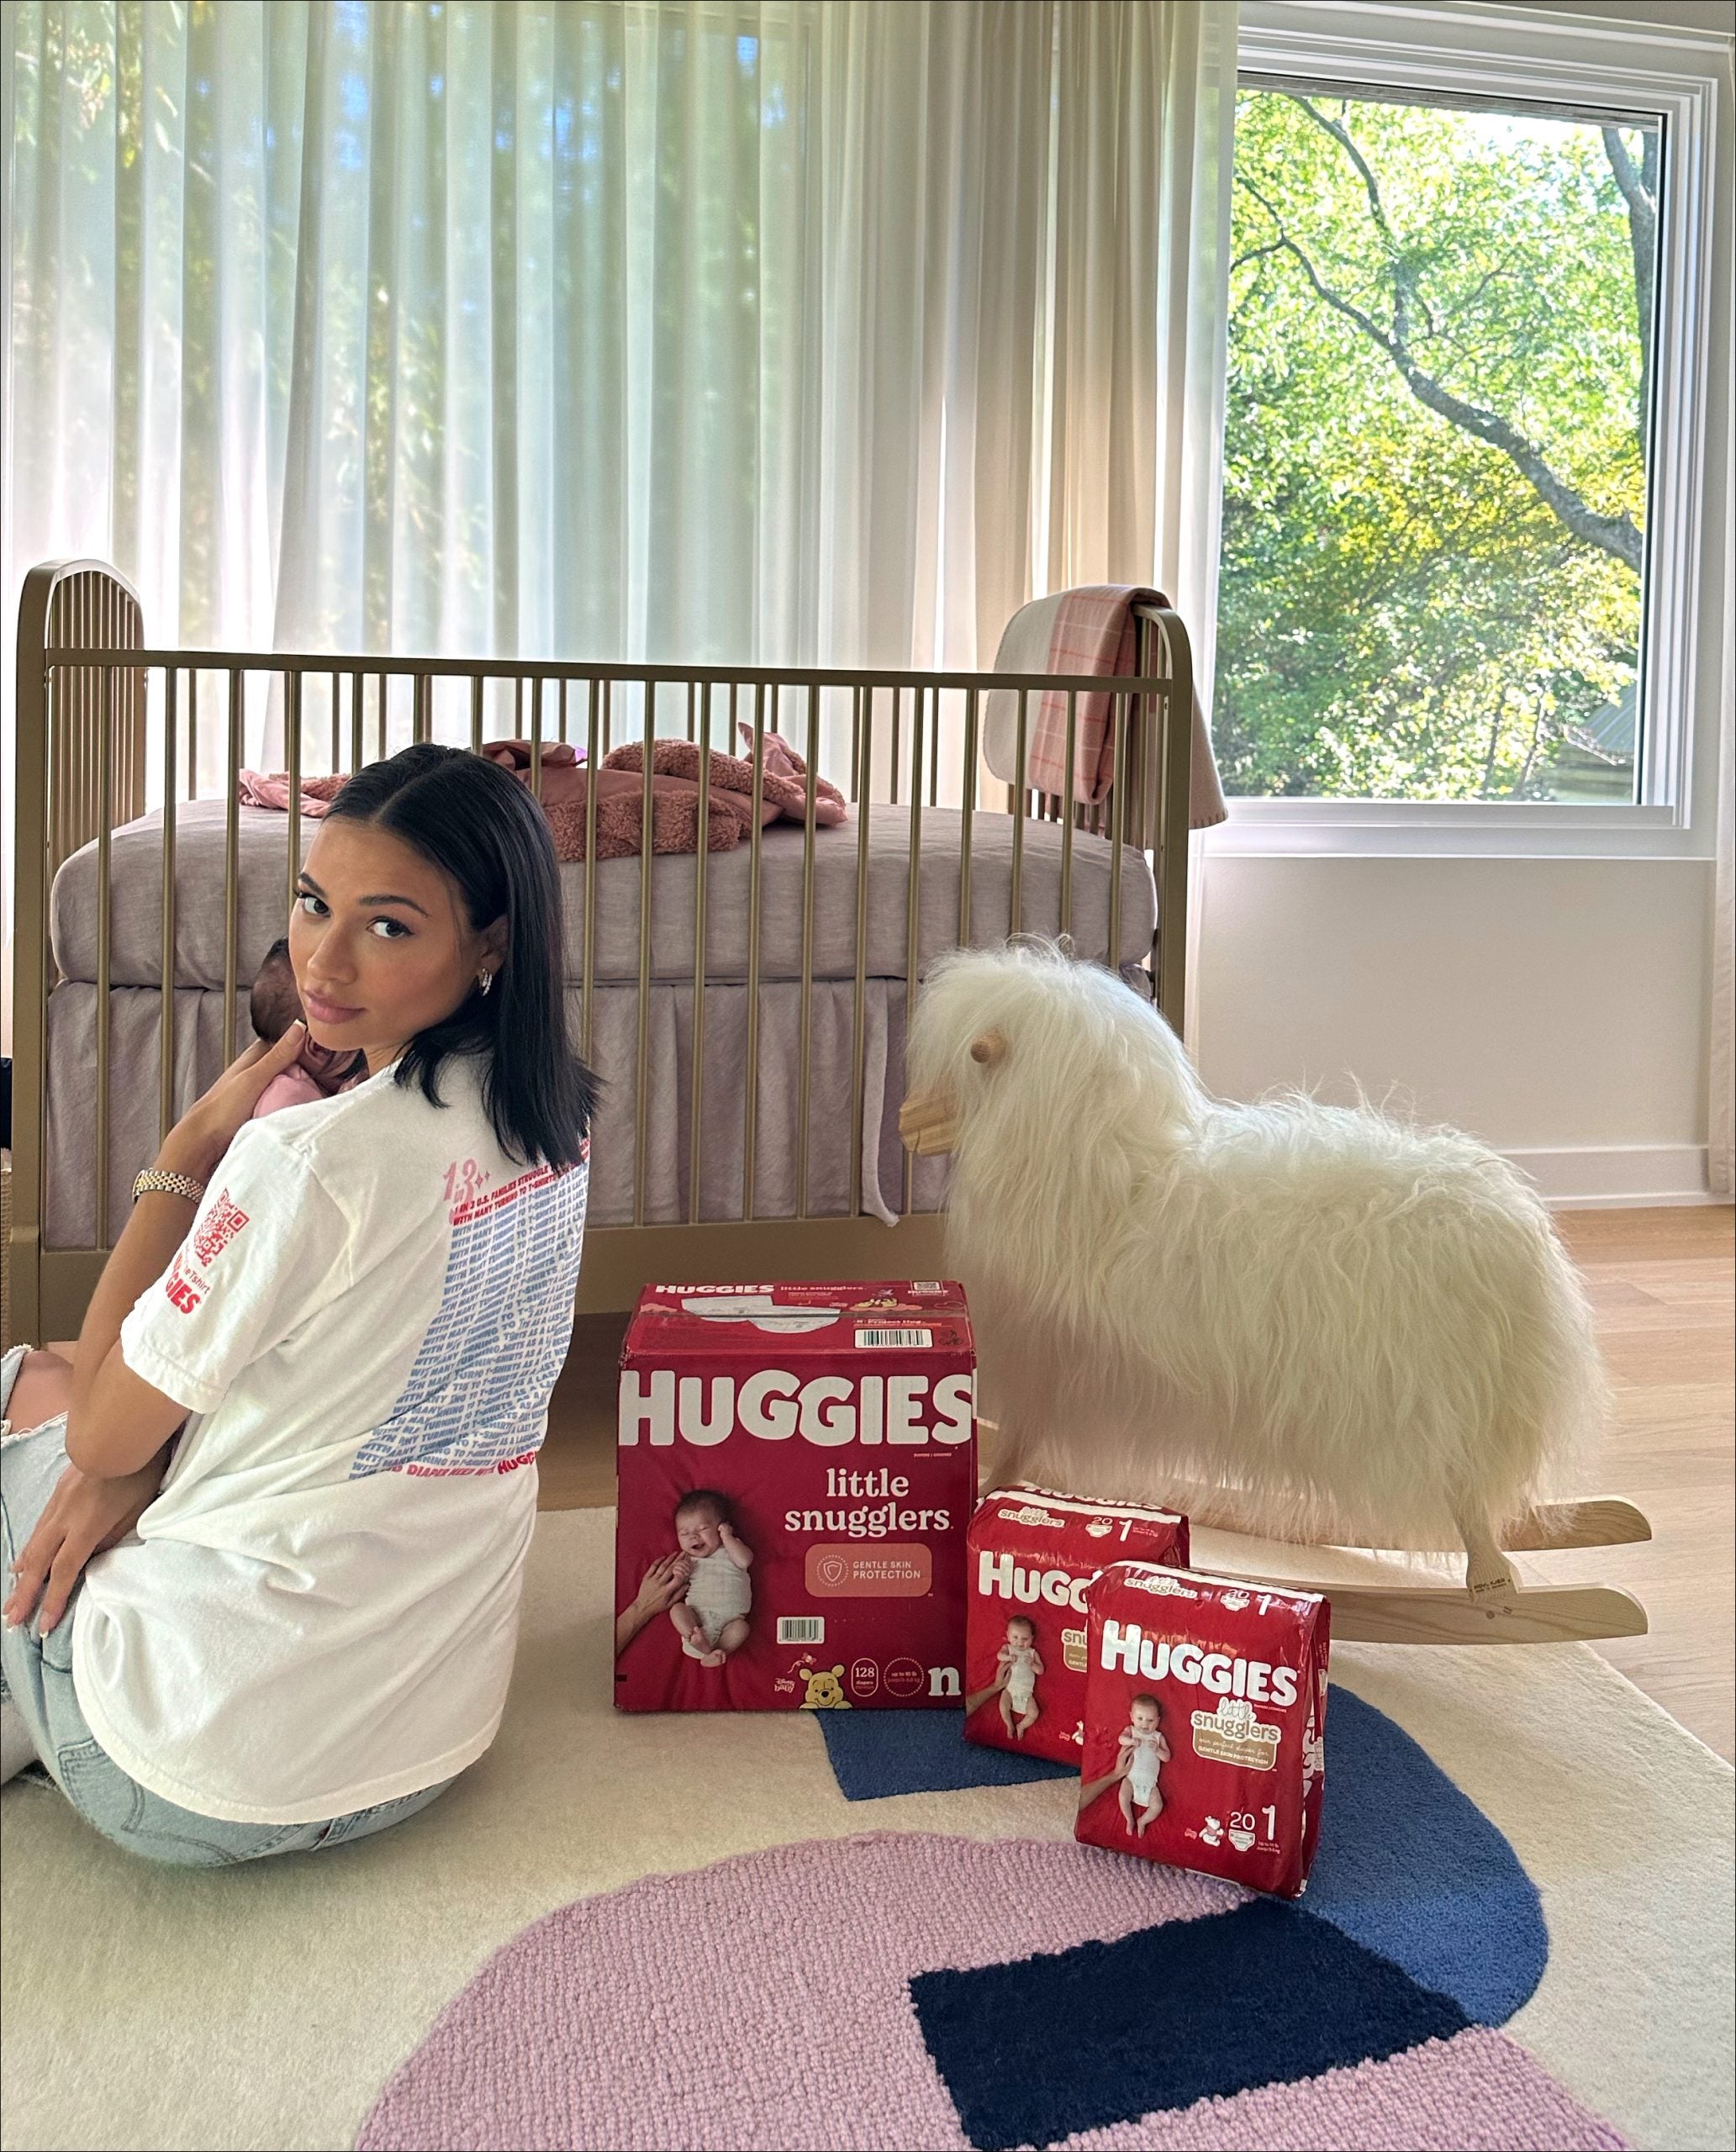 1 In 3 Families Struggle To Afford Diapers In The US. Huggies And